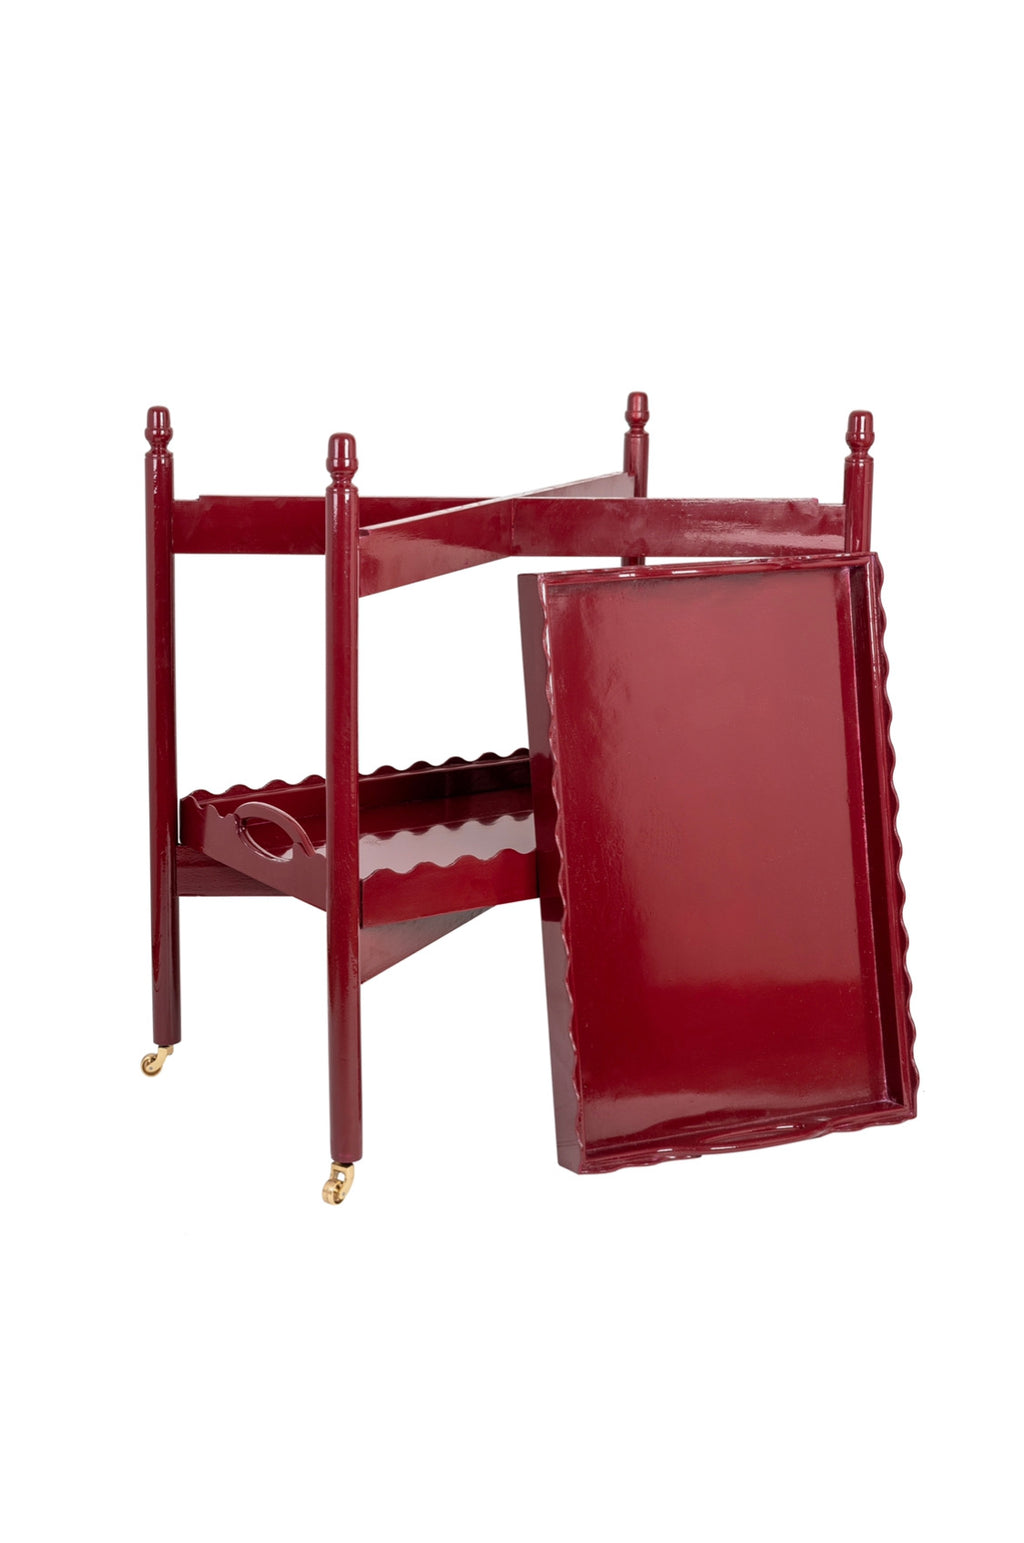 Vintage Burgundy Hand-Lacquered Scallop Edge Trolley (removable trays)